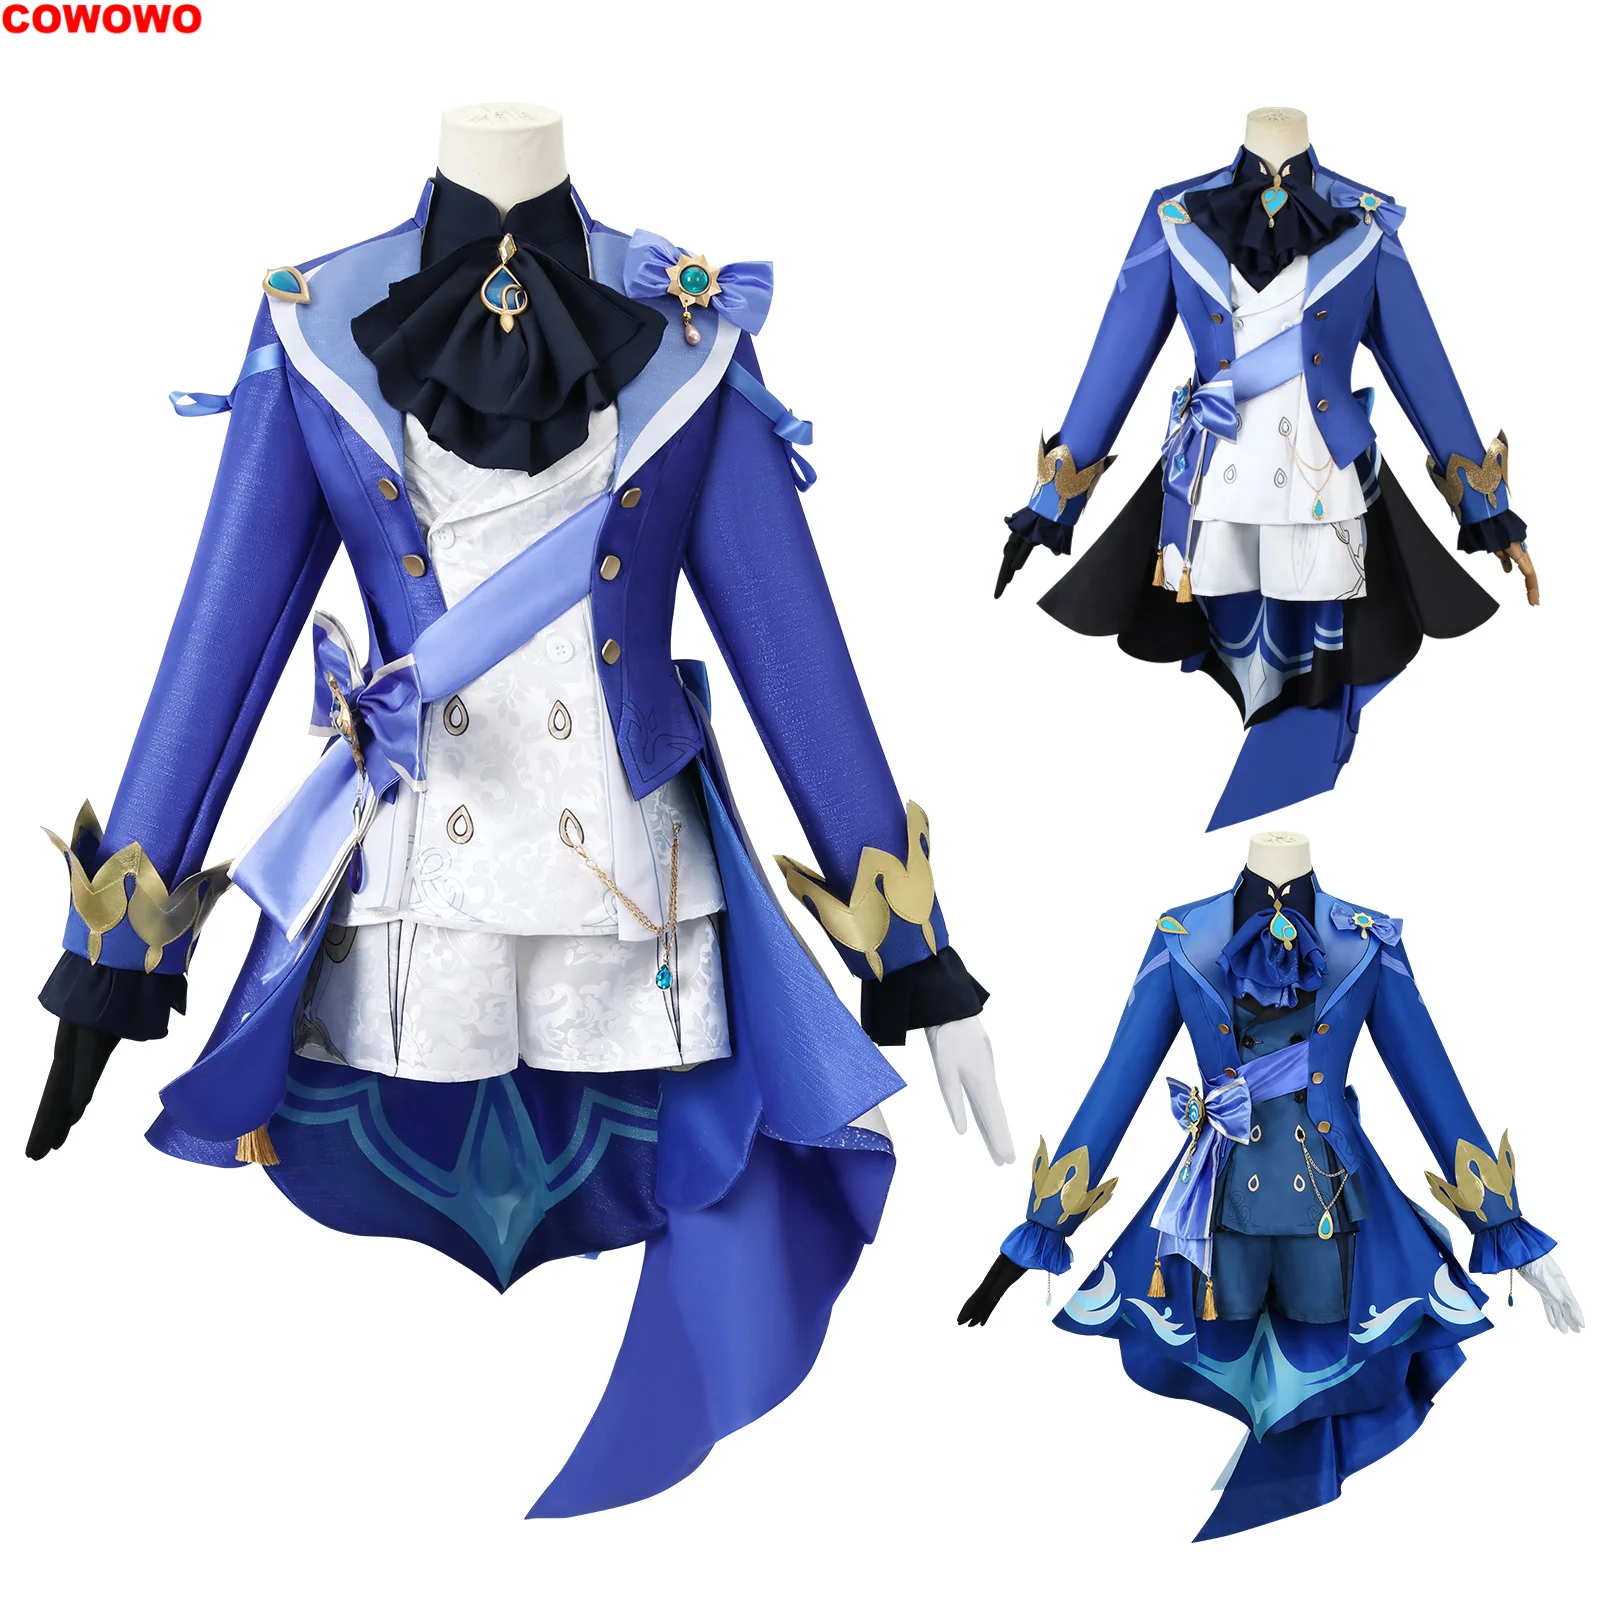 

COWOWO Genshin Impact Furina The God Of Water Cosplay Costume Cos Game Anime Party Uniform Hallowen Play Role Clothes Clothing